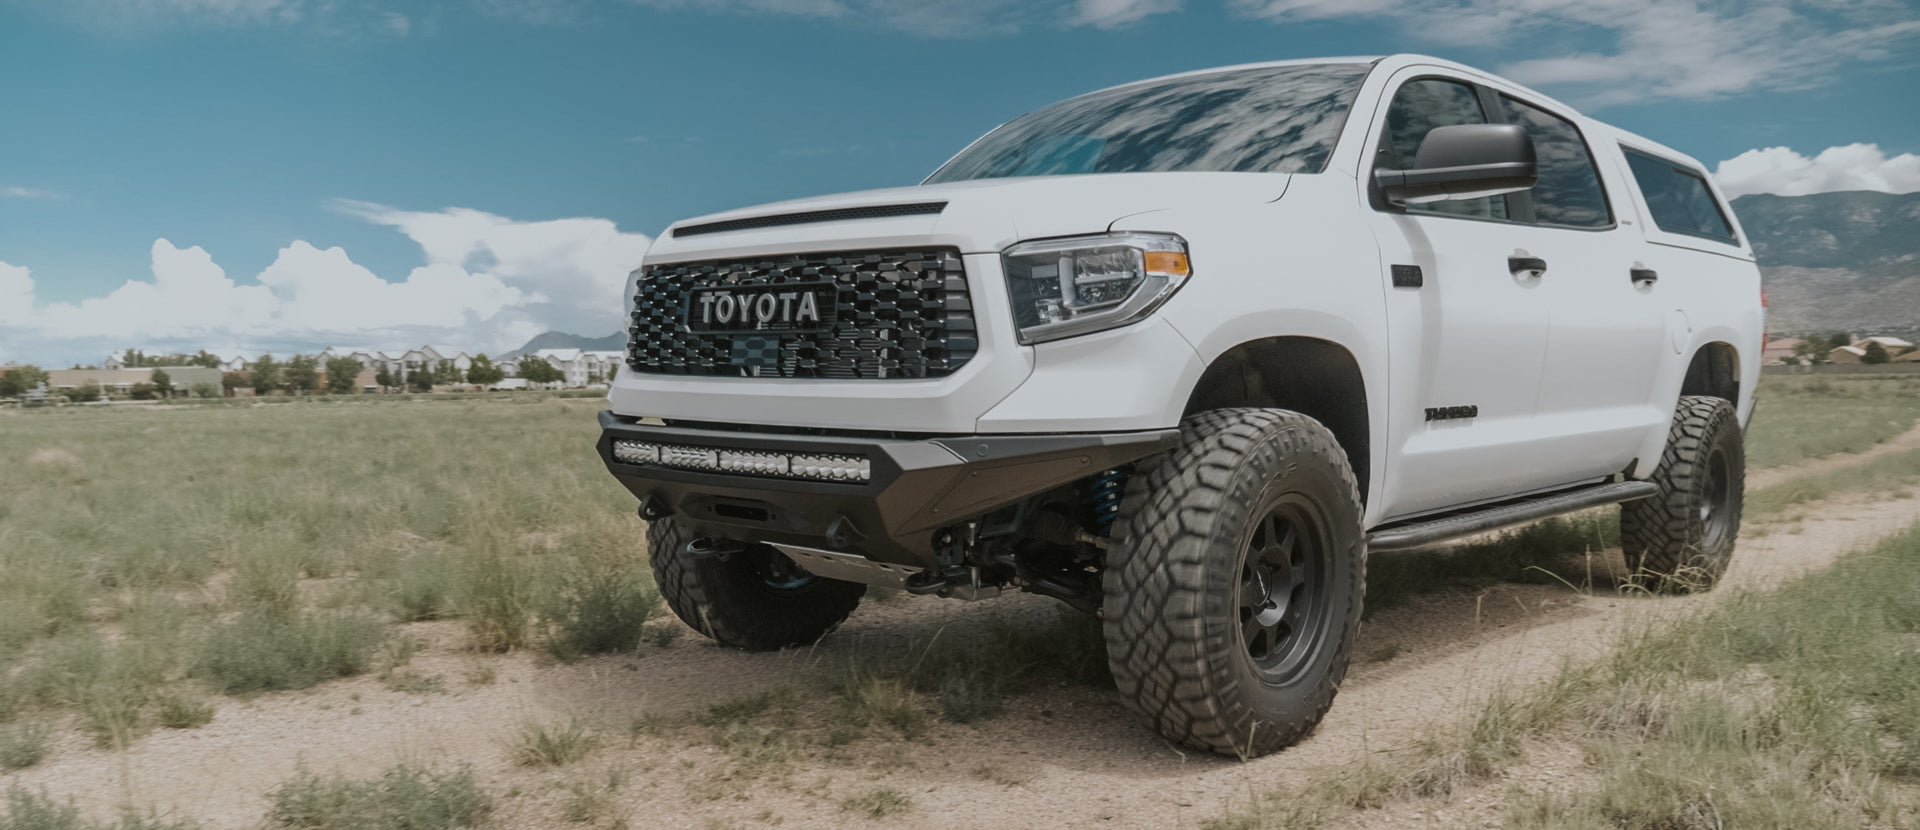 Tundra – Tactical Application Vehicles